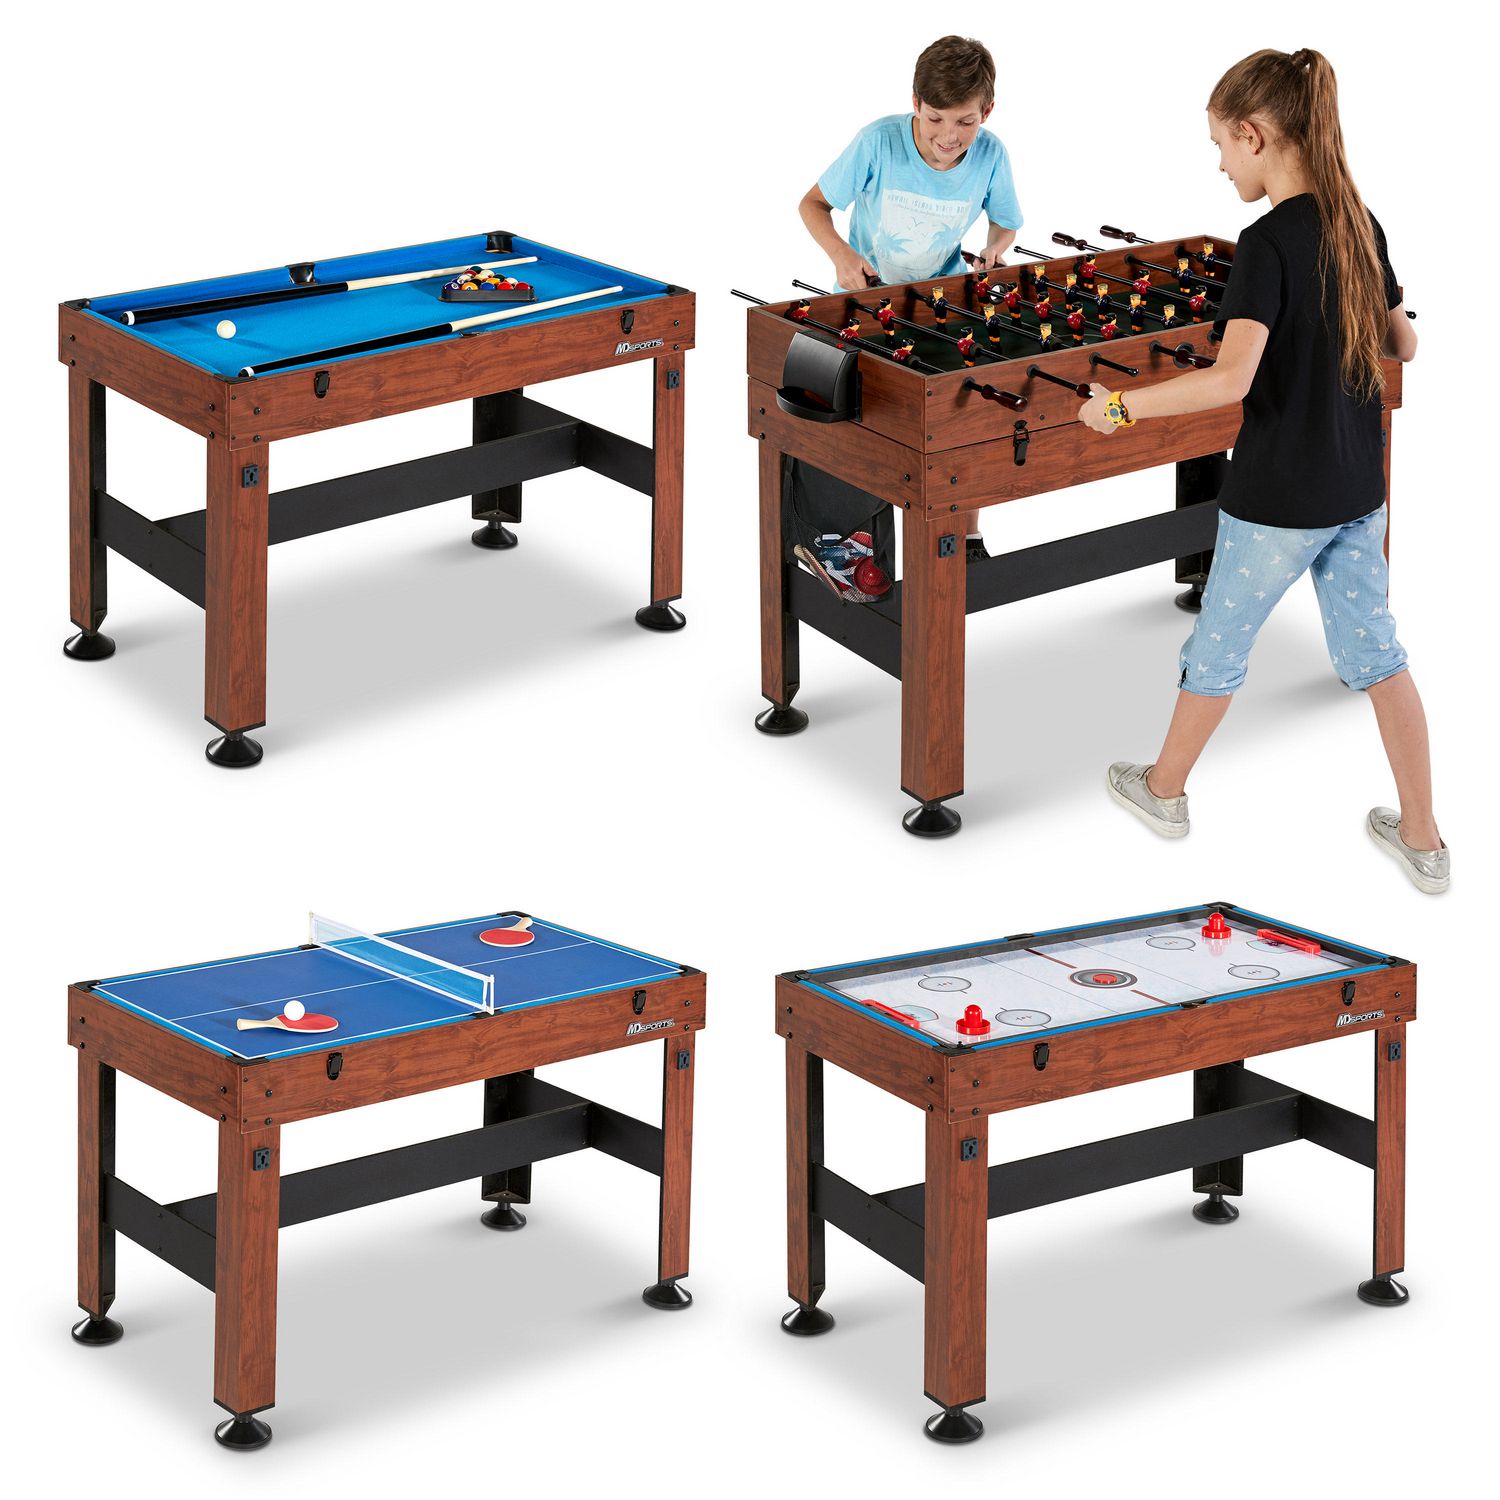 Table Tennis or Billiards Combo Table MD Sports New Multi-Game Play Foosball Slide Hockey 54, 4 in 1 